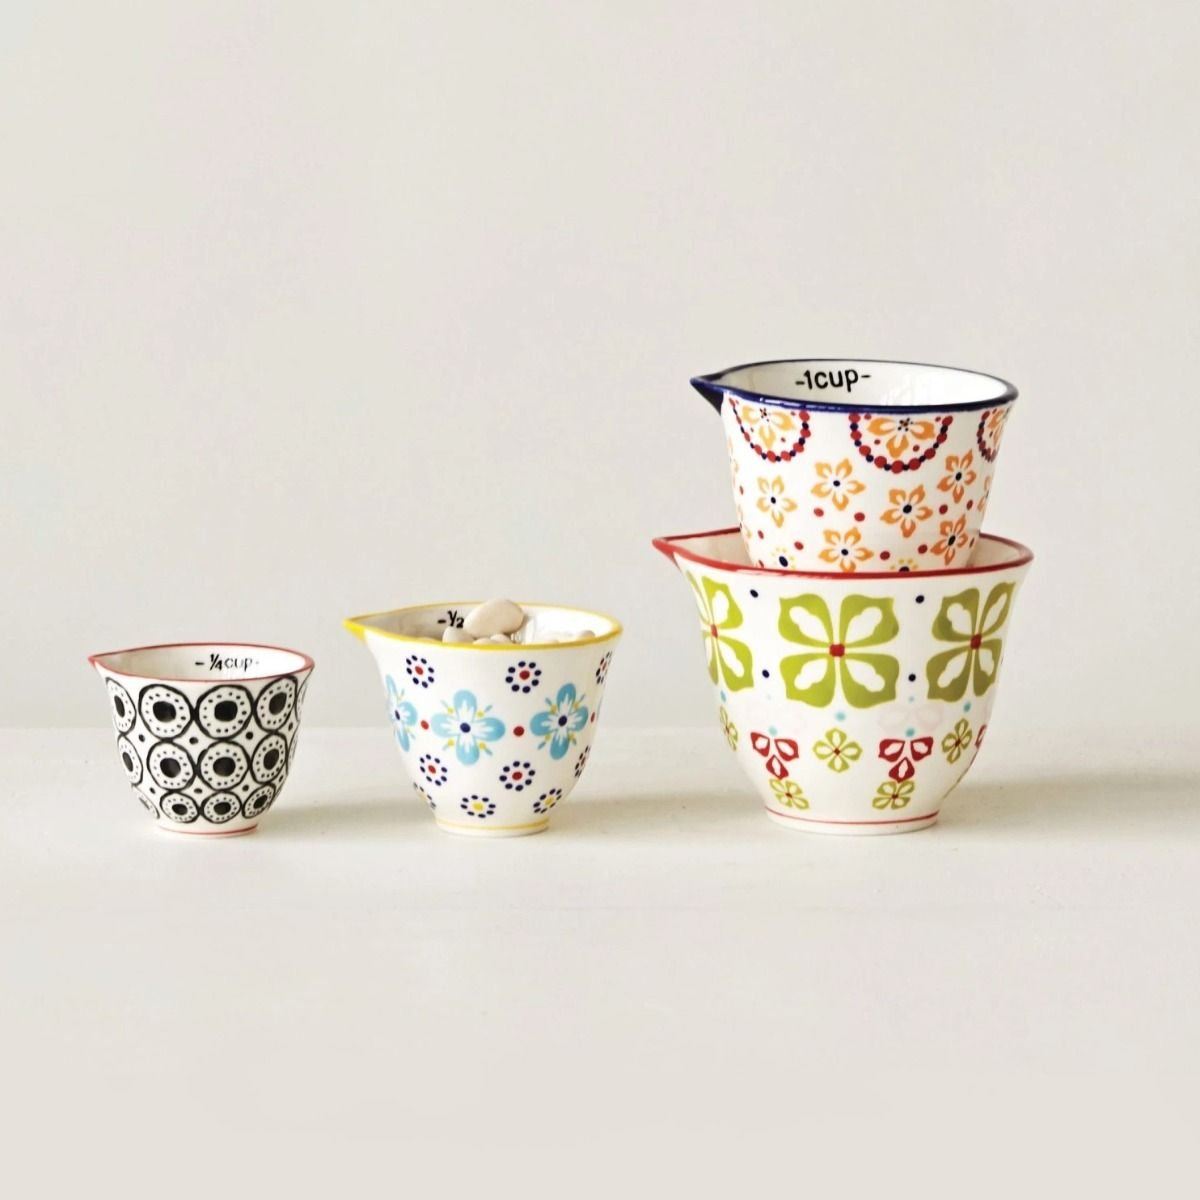 Stoneware Measuring Cups with Pour Spout Creative Co-op